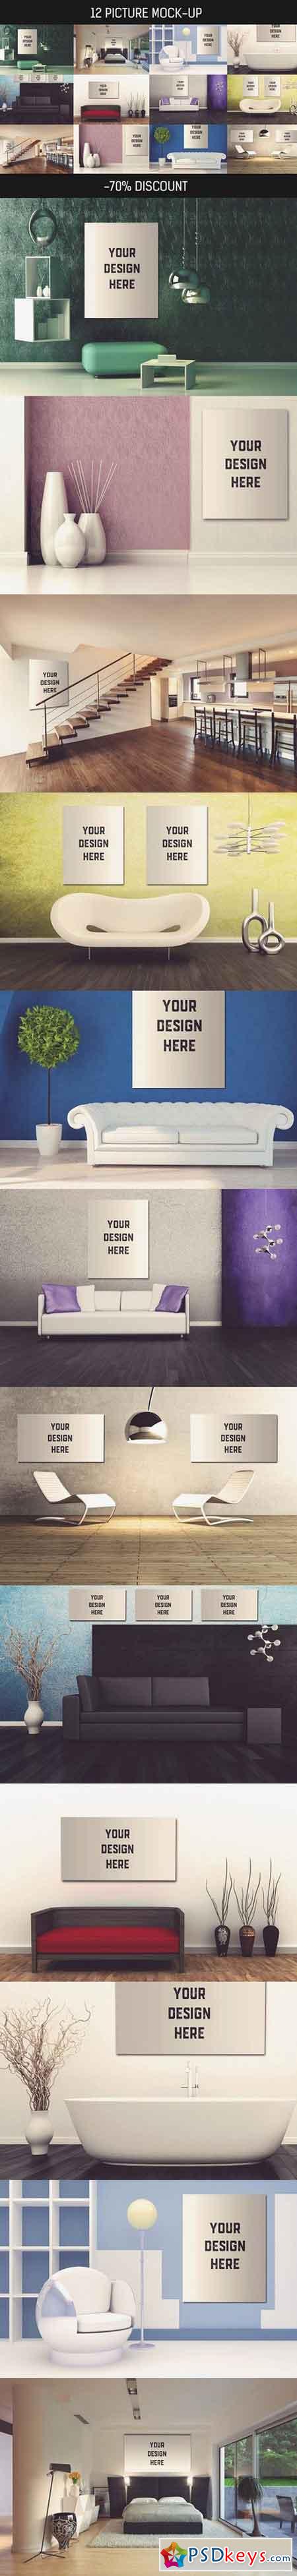 12 Picture on Wall Mock-up Pack#2 1586267